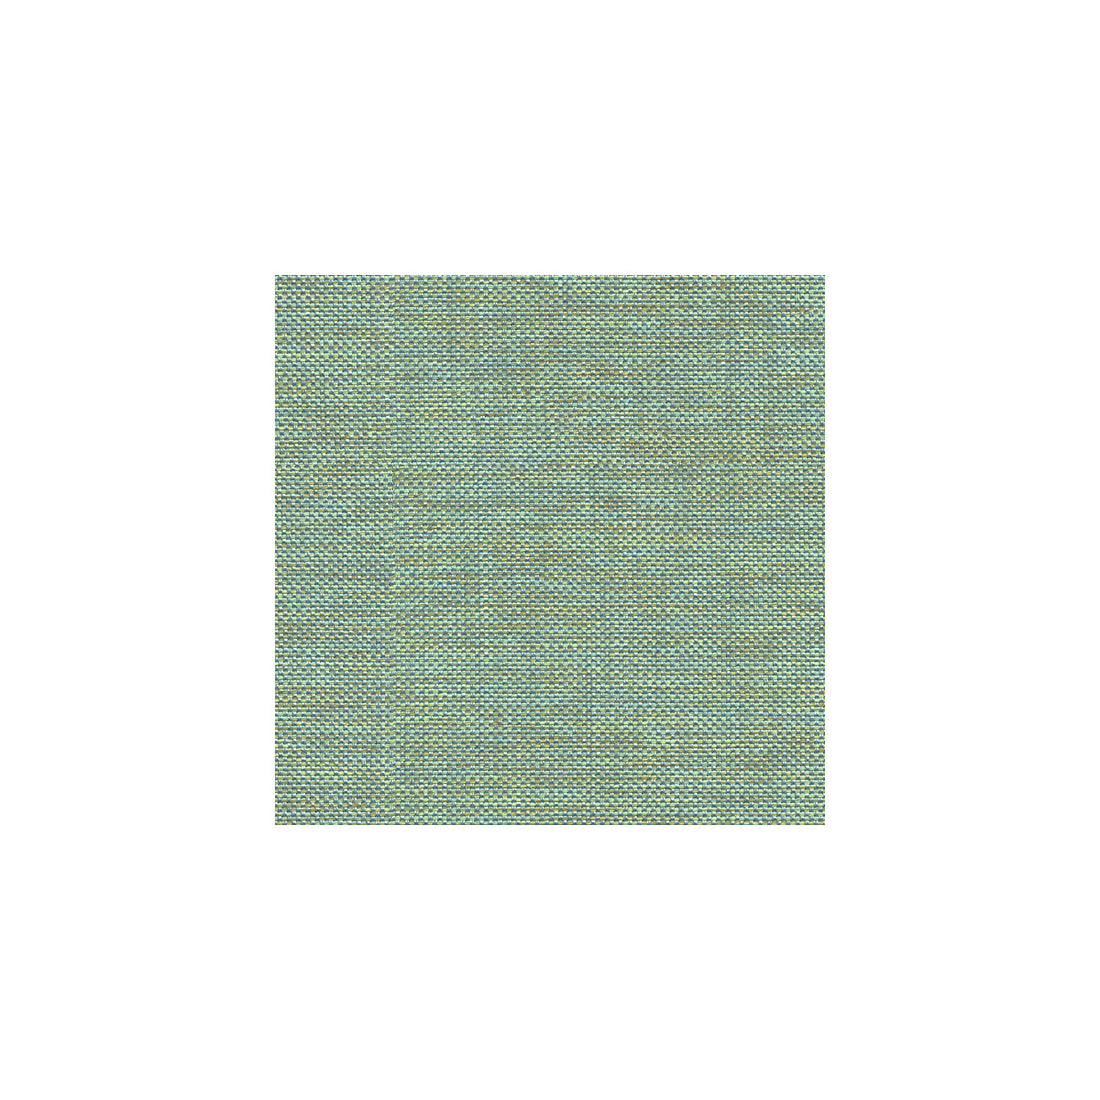 Pyper fabric in lagoon color - pattern 32922.5.0 - by Kravet Basics in the Candice Olson collection